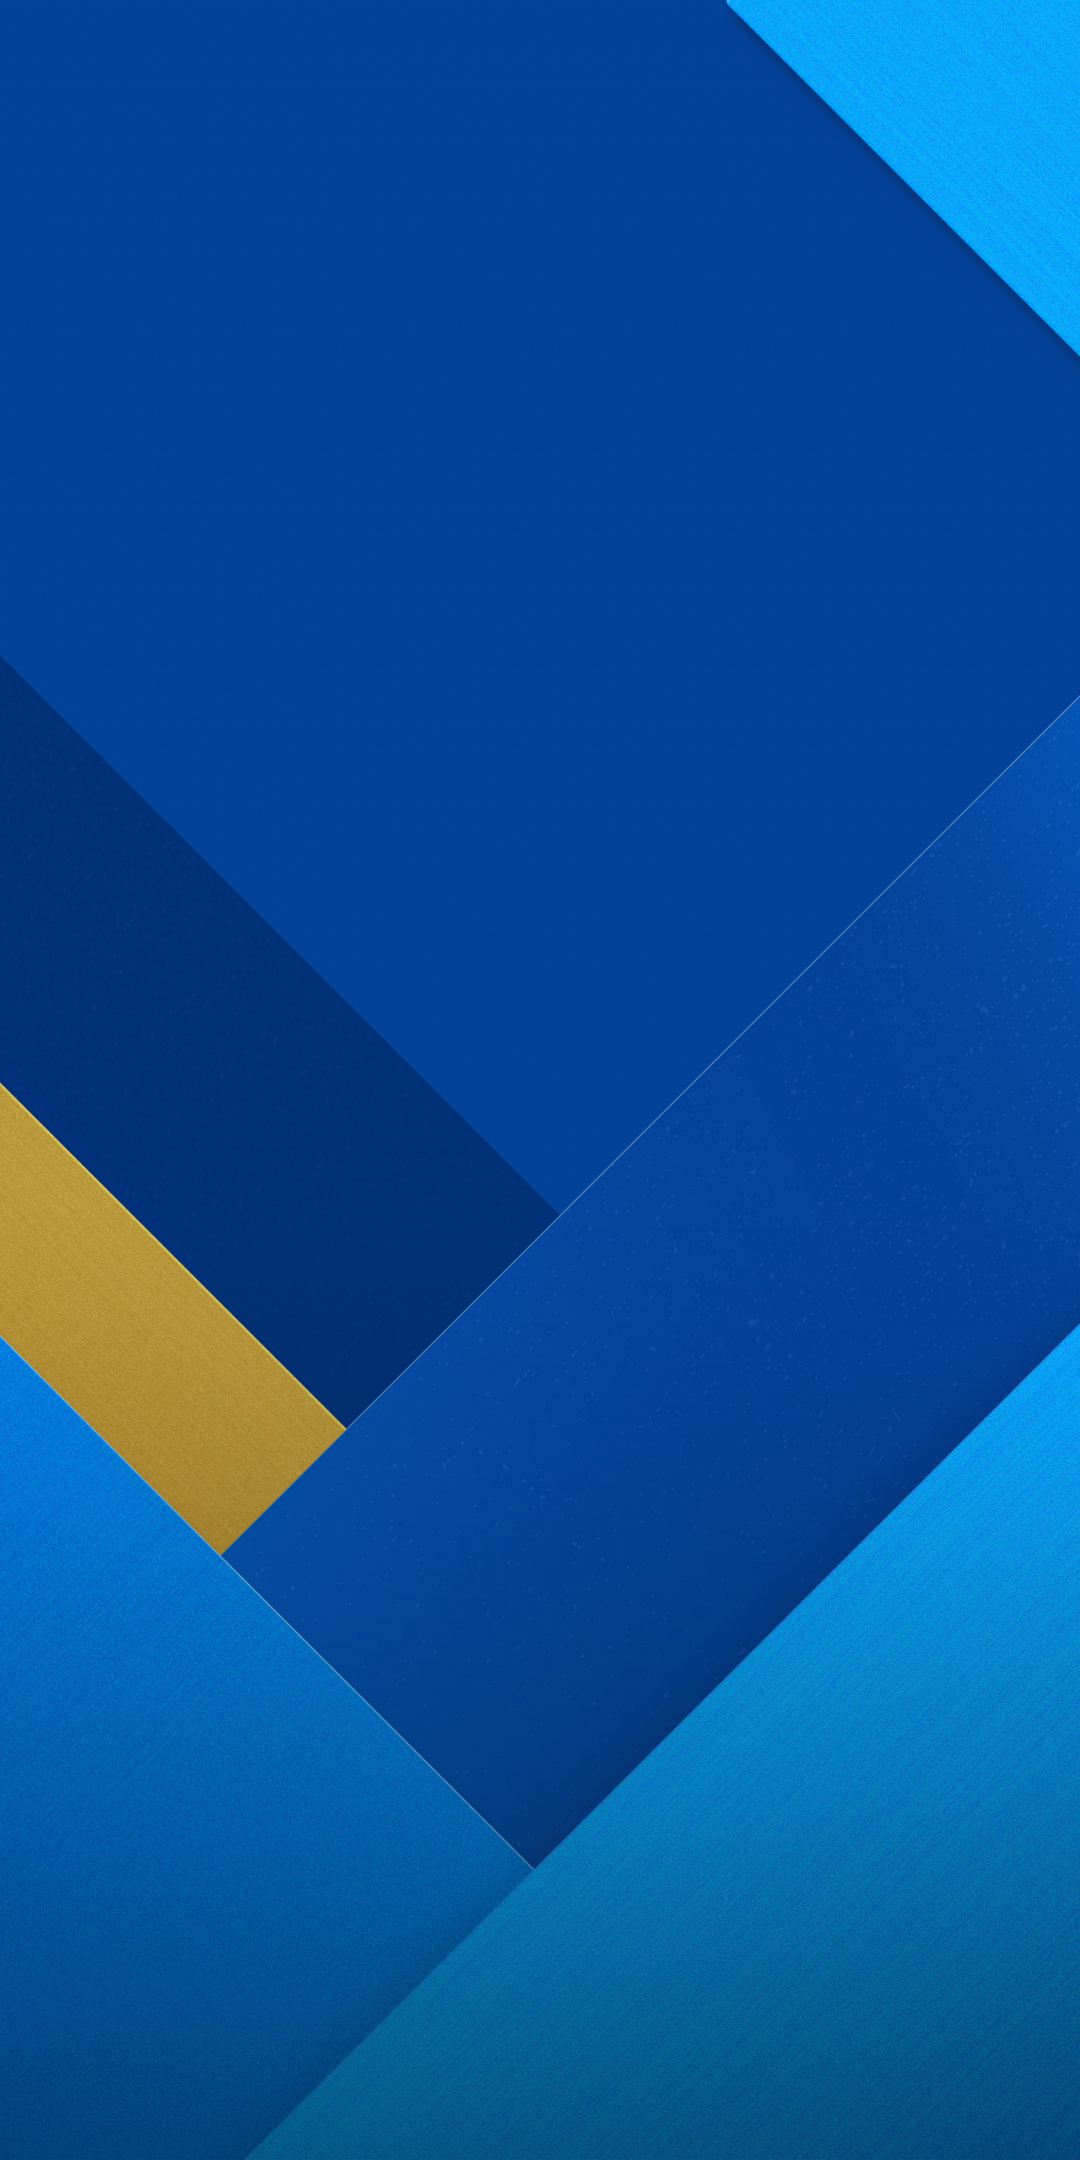 Geometric, material design, stock blue, abstract, 1080x2160 wallpaper